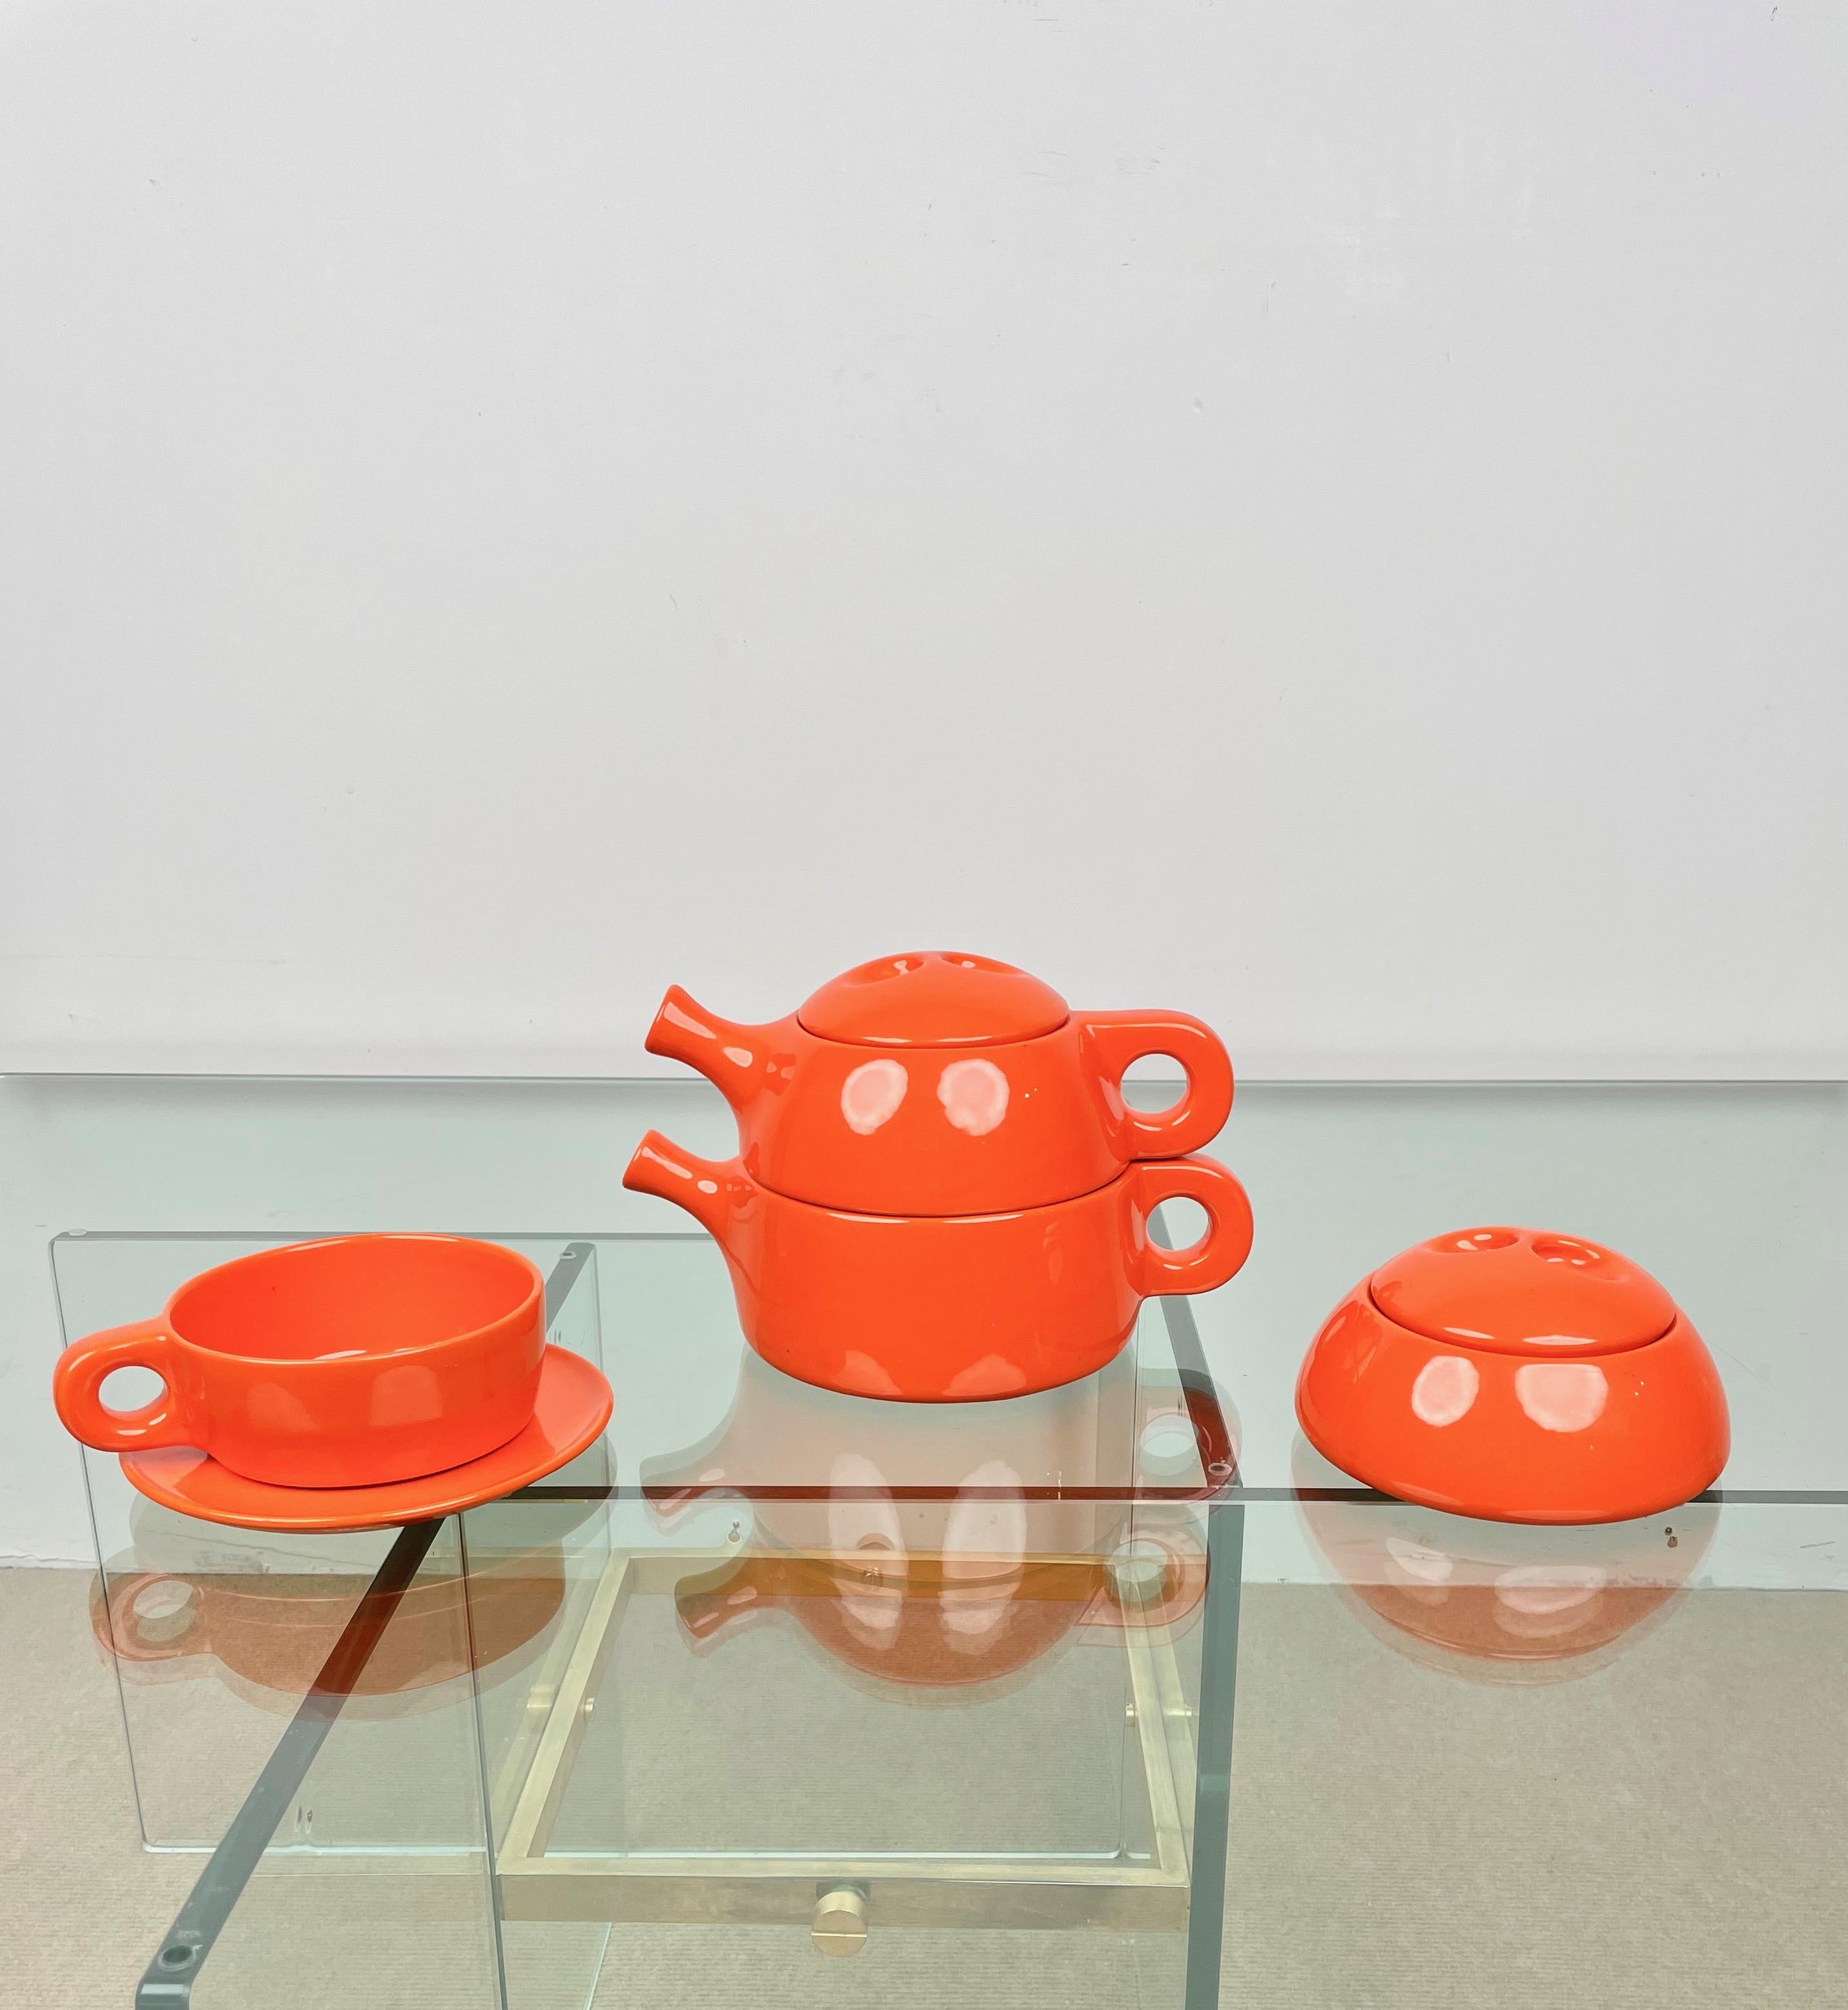 Mid-20th Century Tea Set in Orange Ceramic by Liisi Beckmann for Gabbianelli, Italy, 1960s For Sale